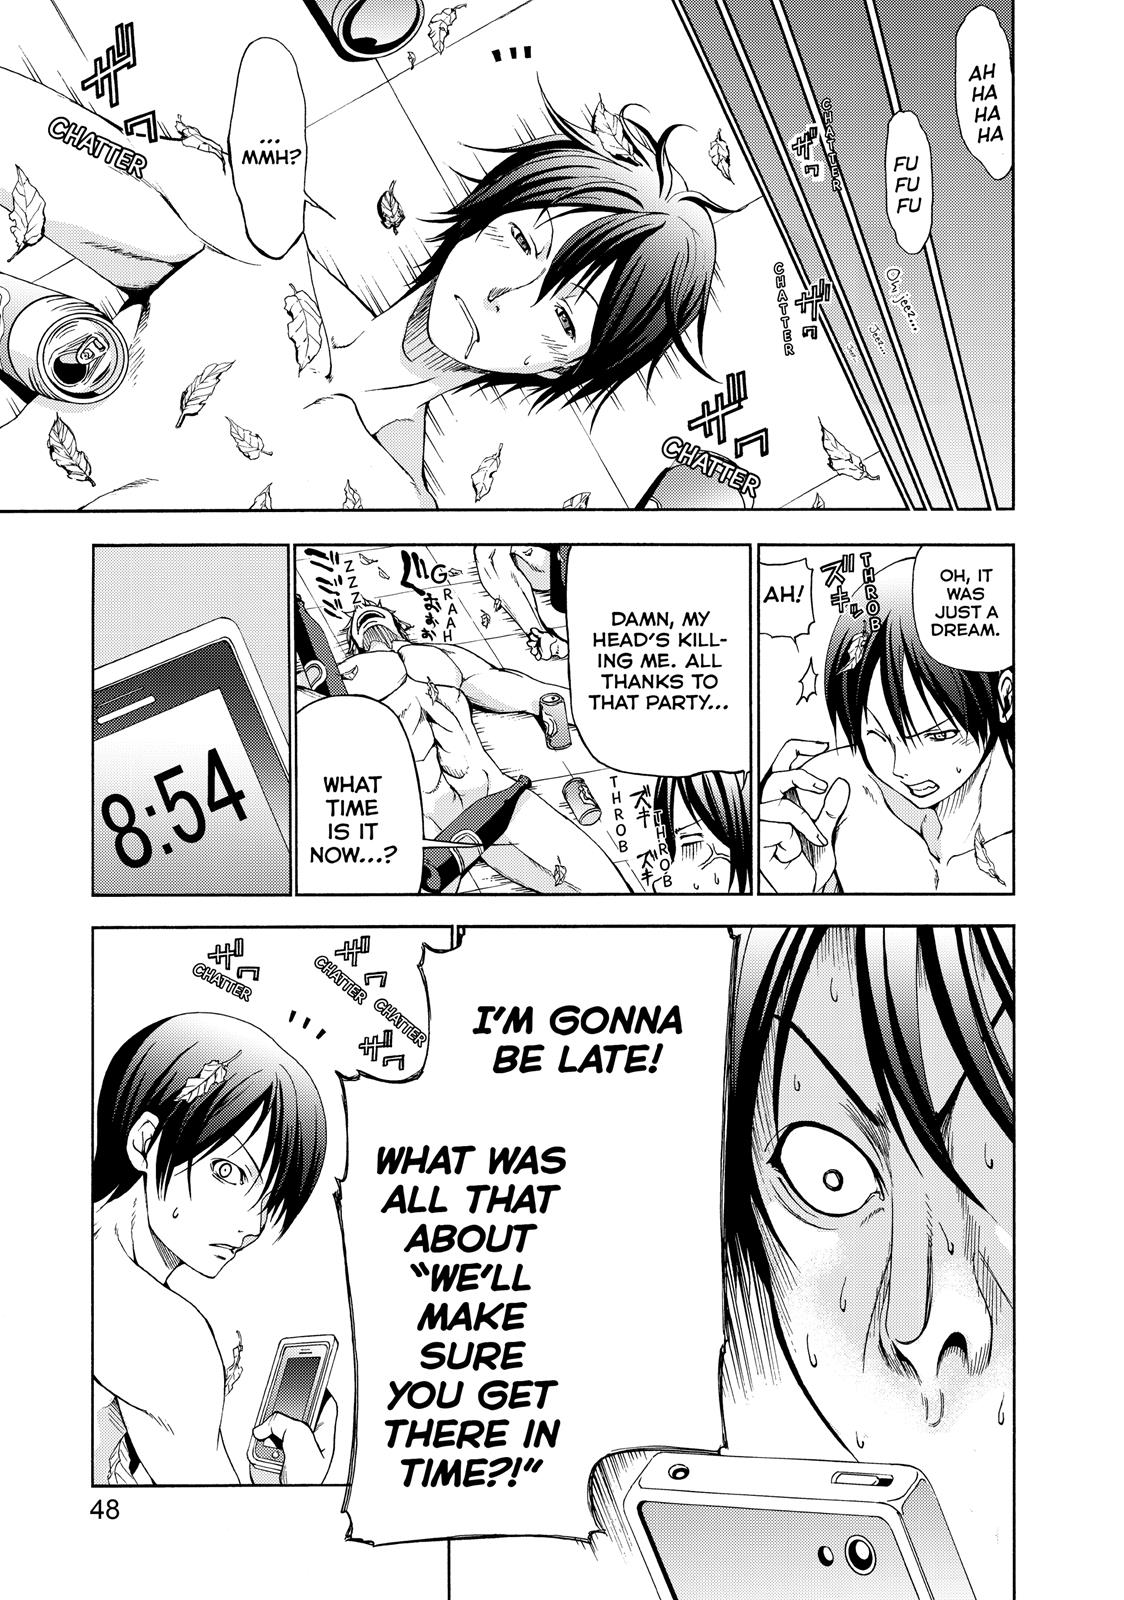 Grand Blue, Chapter 1 image 48